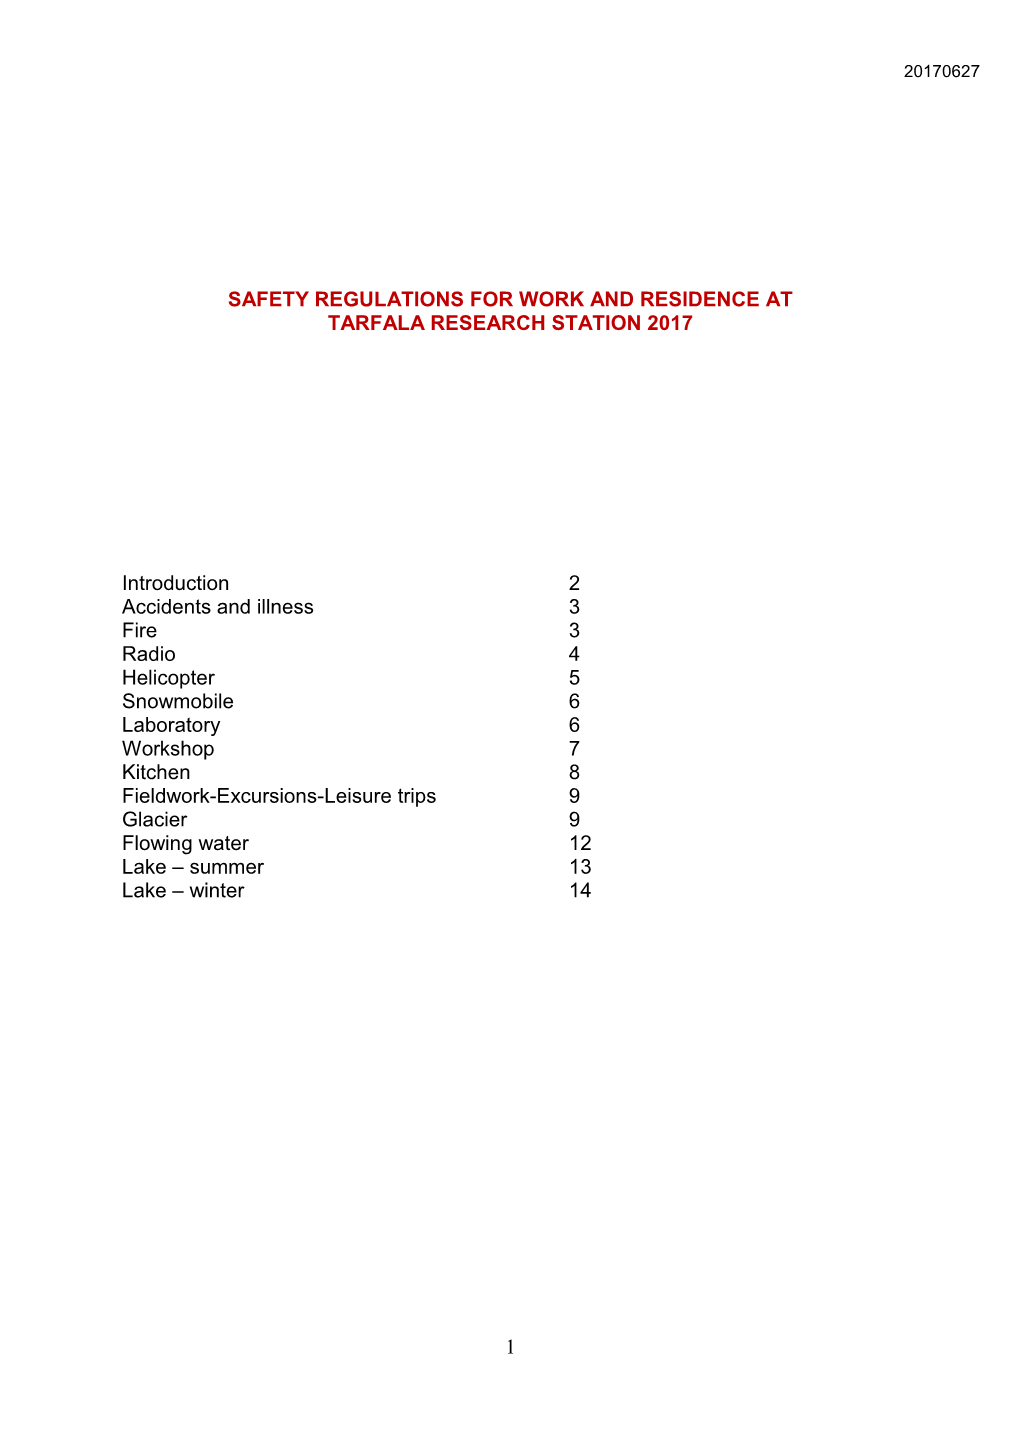 1 Safety Regulations for Work and Residence At